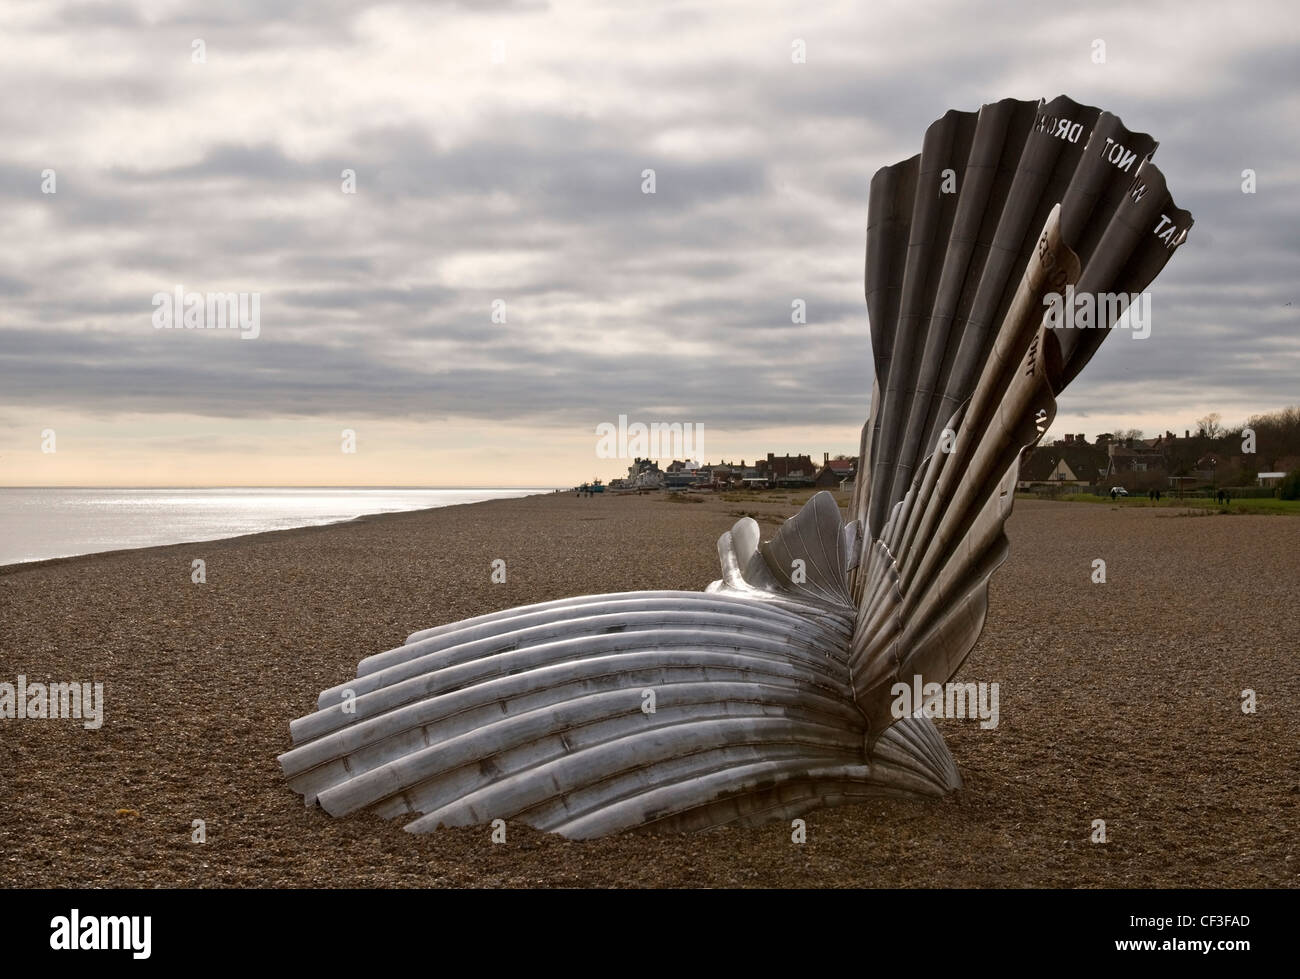 The Scallop sculpture by Maggie Hambling on the beach at Aldeburgh. Stock Photo